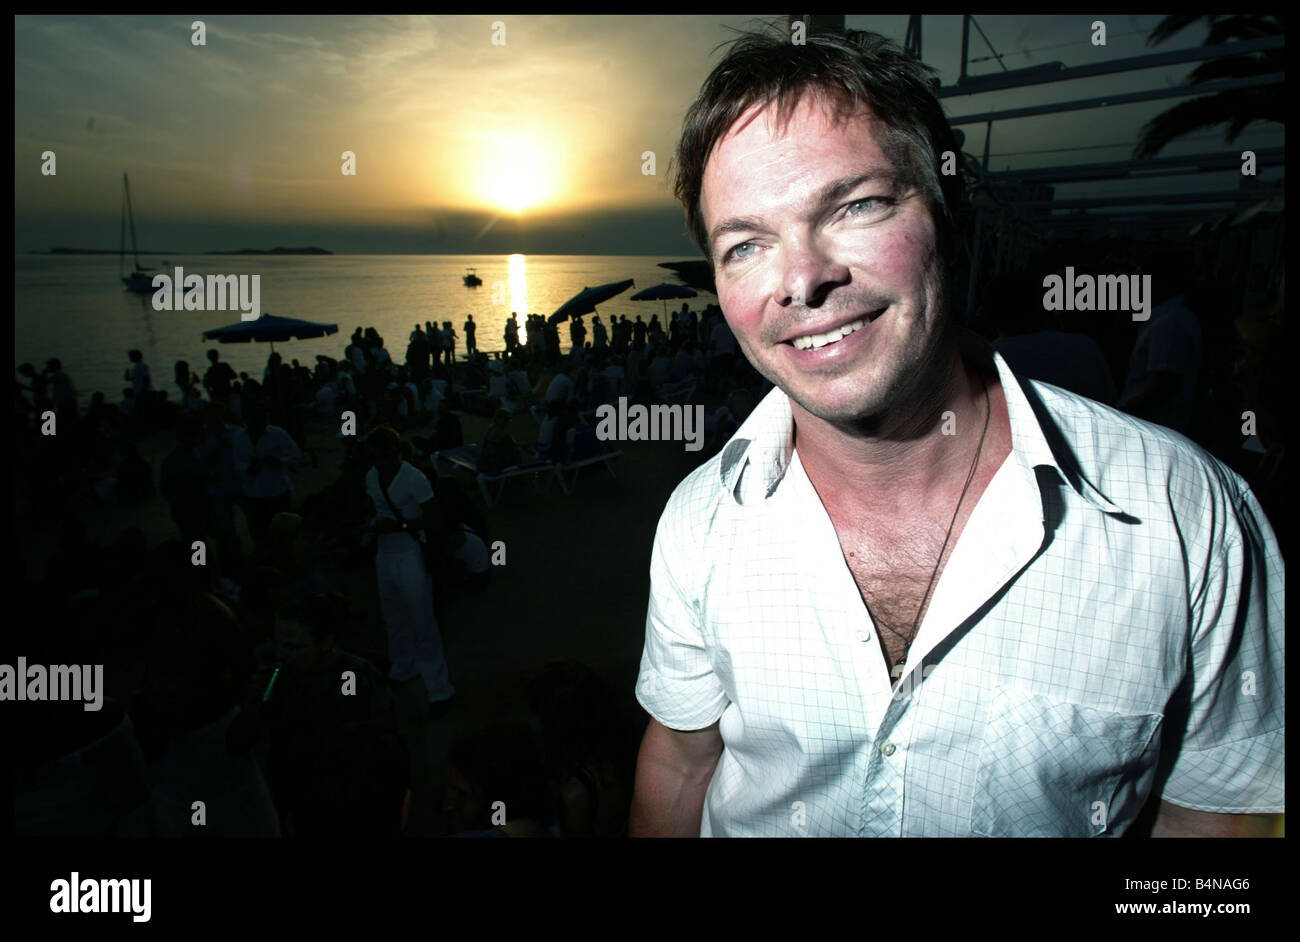 Radio 1 Dj Pete Tong on the beach outside Mambo where Pete will be playing  all summer in Ibiza Sunset Stock Photo - Alamy